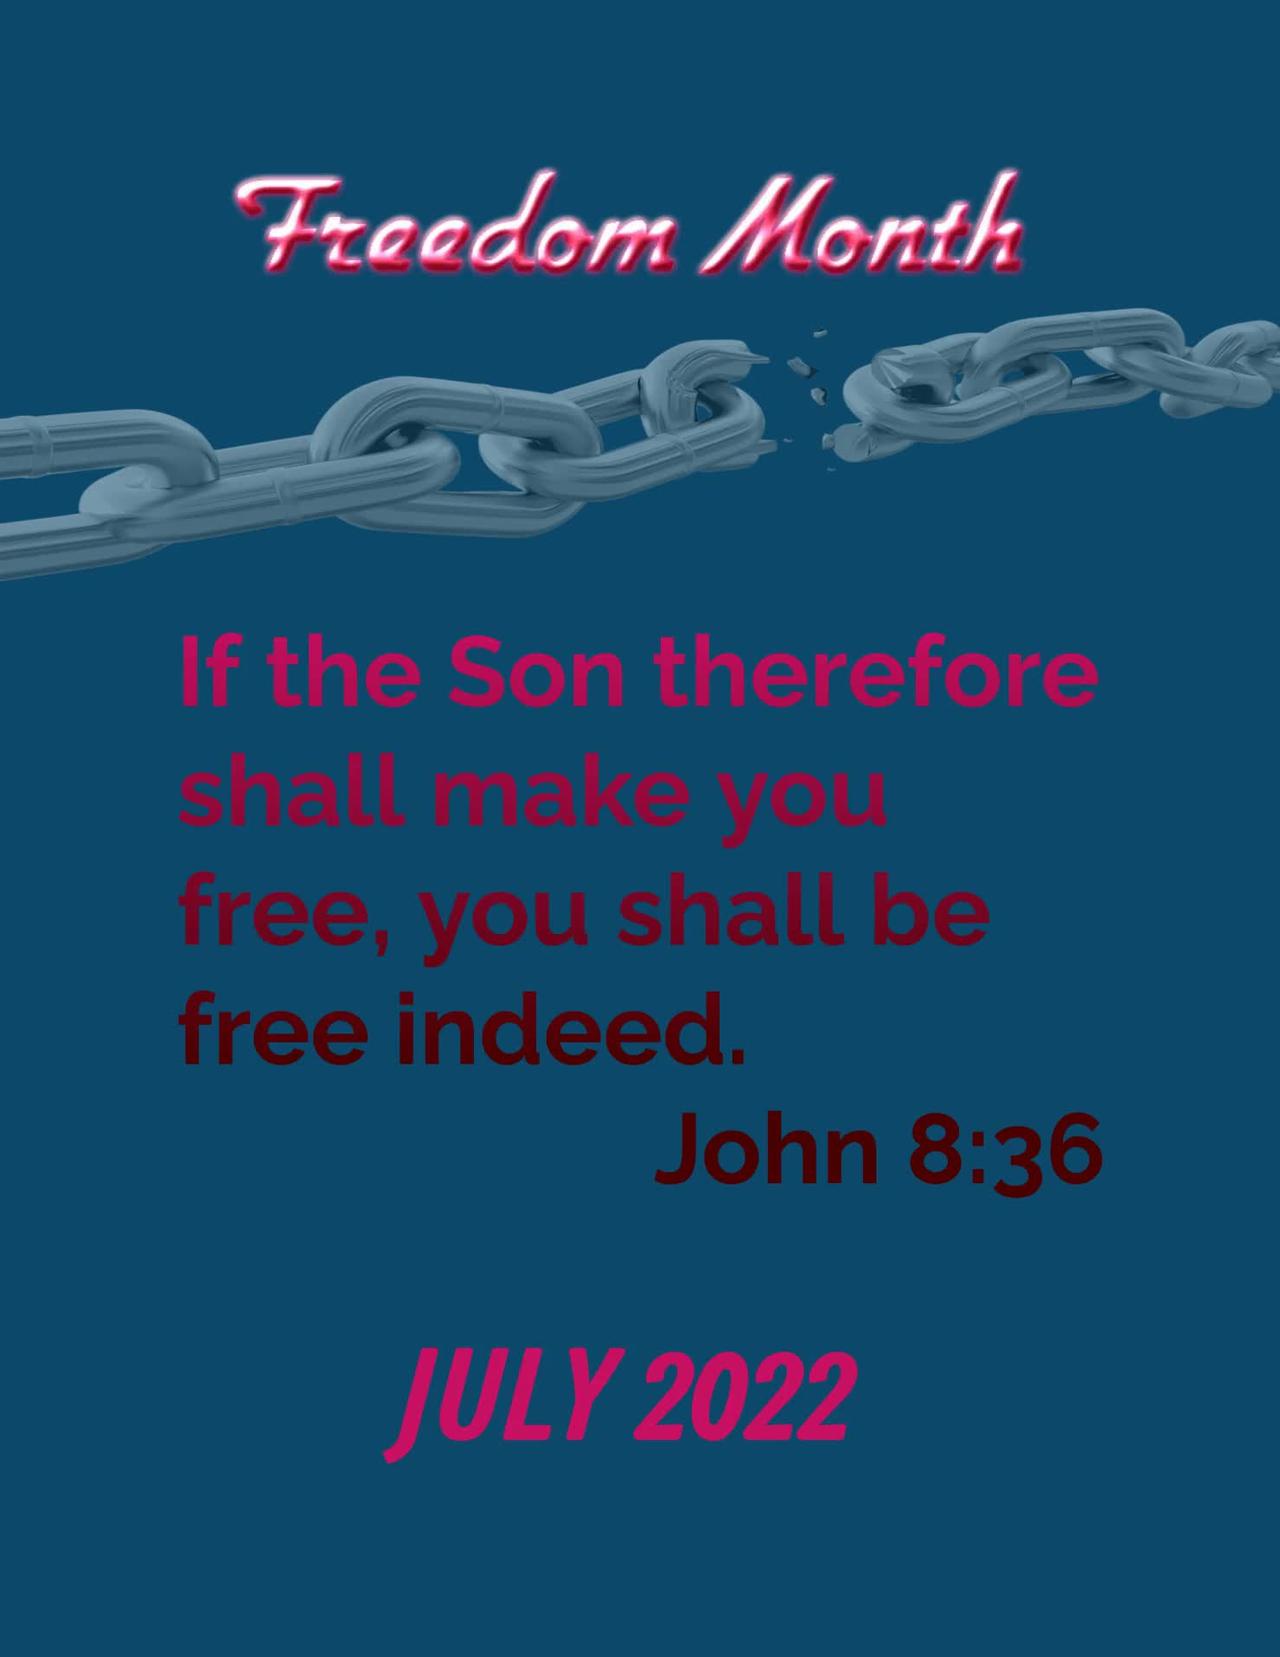 Freedom Month